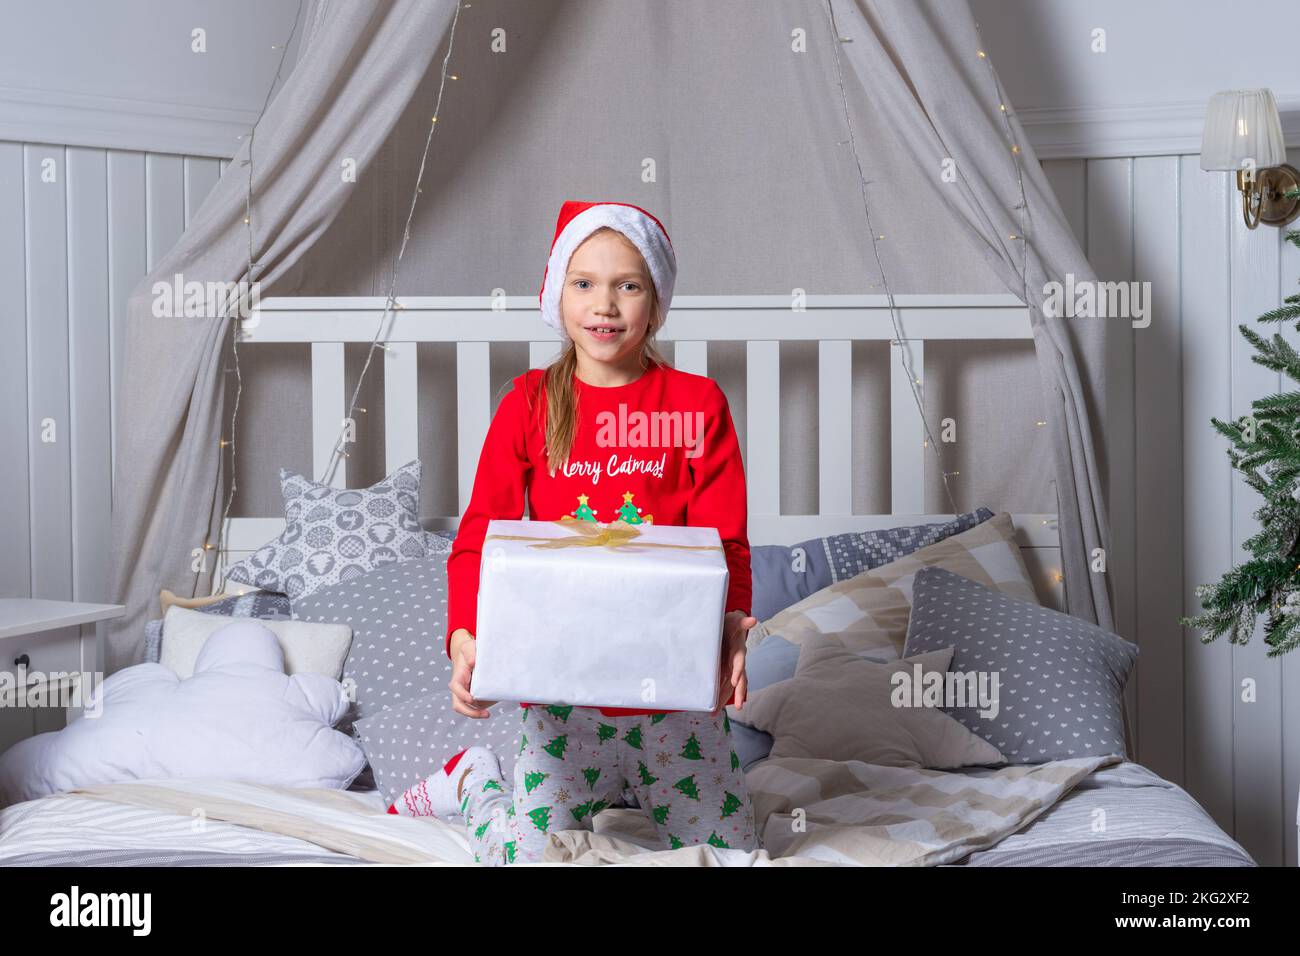 Happy funny baby girl in pajamas and Santa hat holding a gift box in bed on Christmas morning. Children are enjoying the Christmas holiday. The child Stock Photo